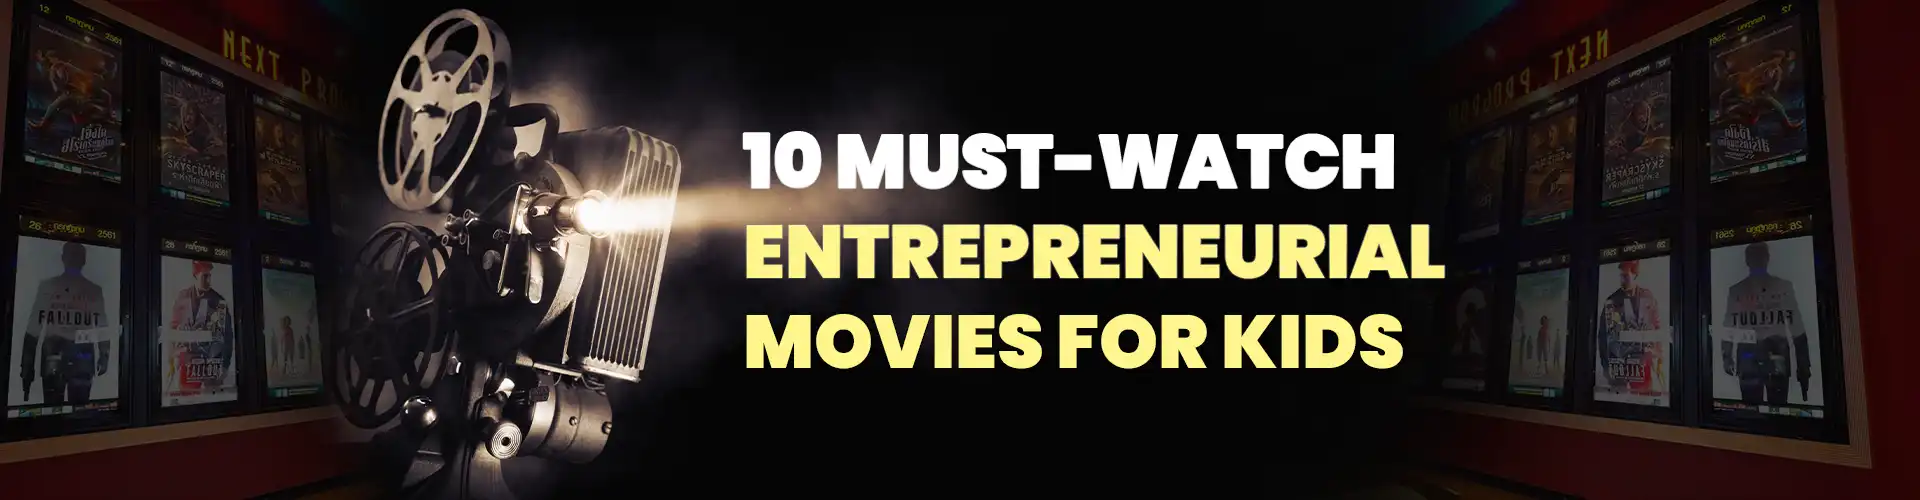 10 Must-Watch Entrepreneurial Movies For Kids